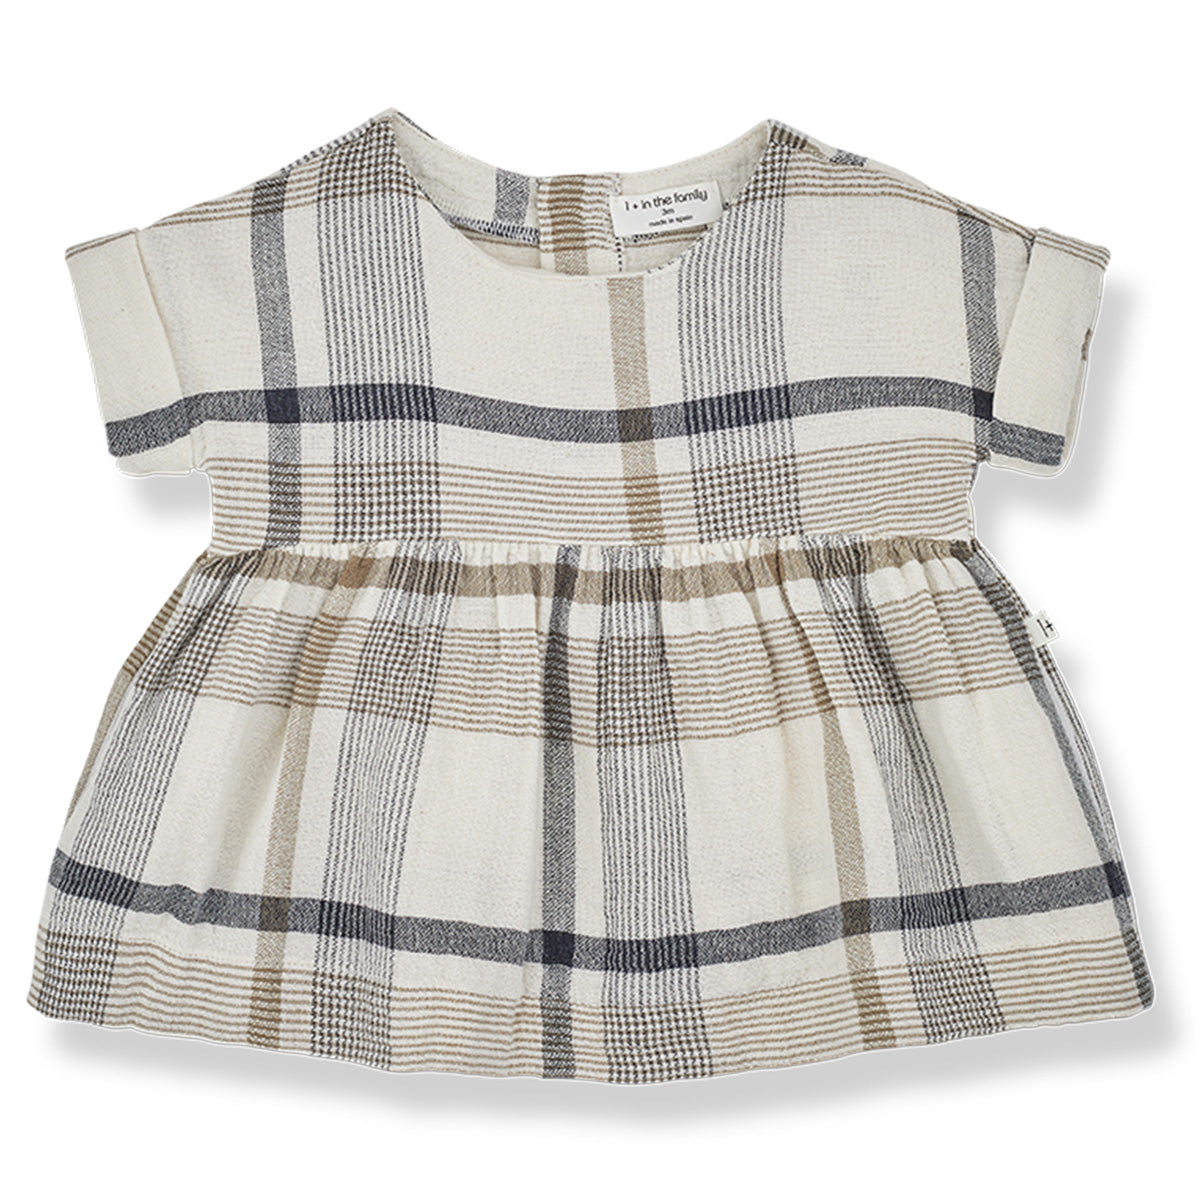 The Josephine Short Sleeve Dress from 1 + in the Family. Sweet baby dress in a check double face fabric.